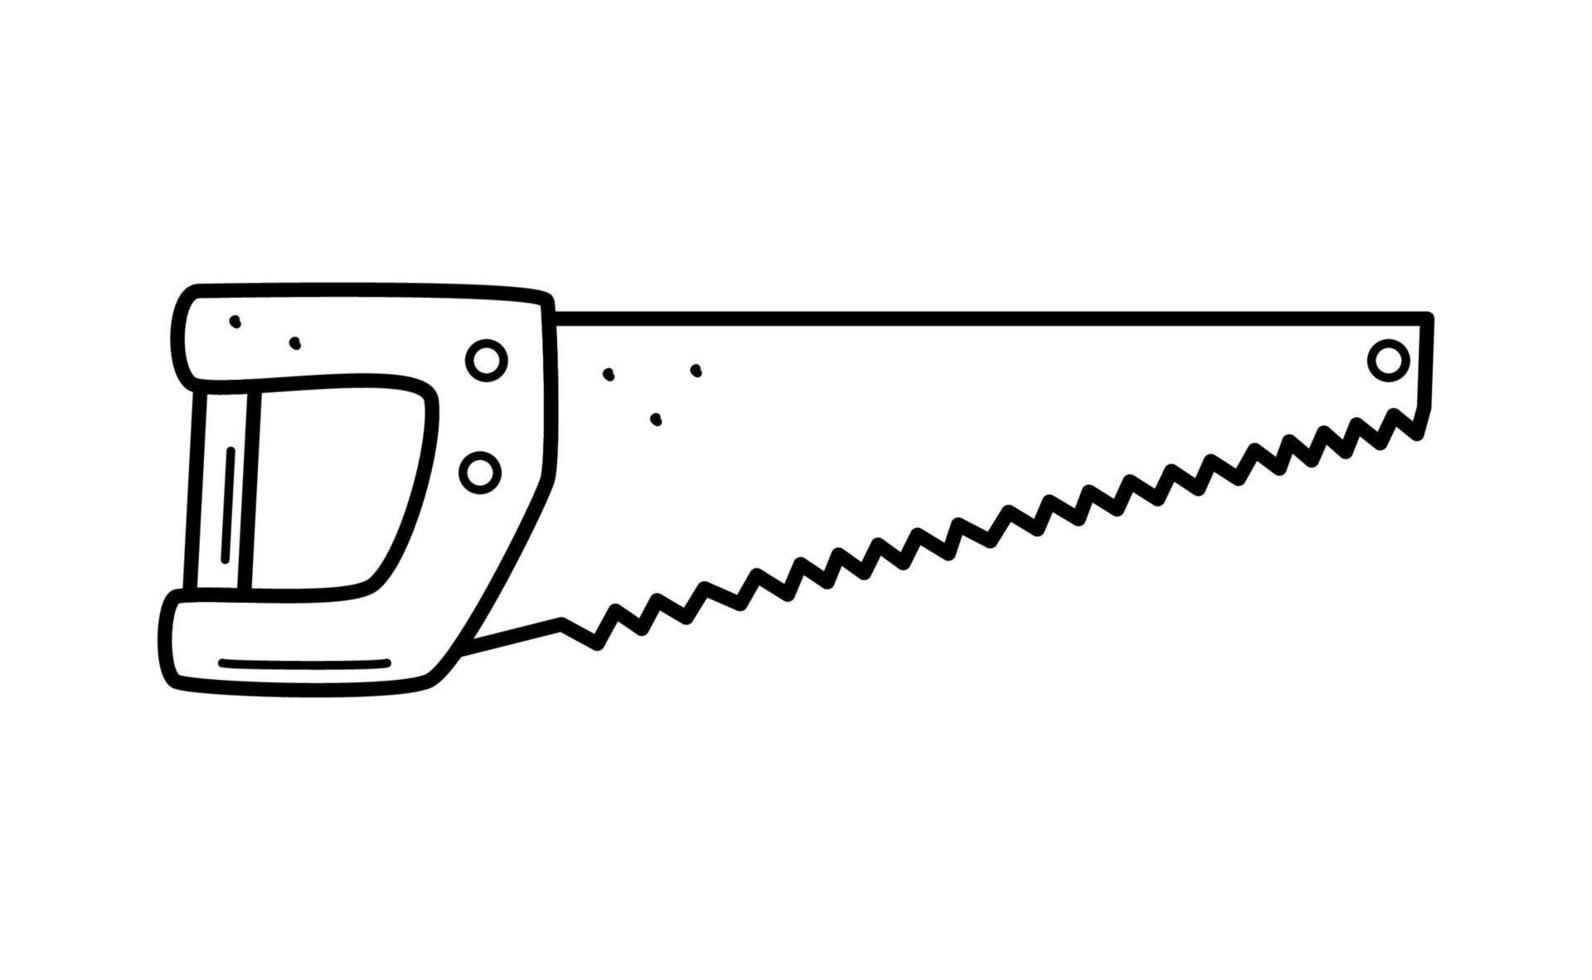 Hand saw doodle cartoon style. Vector illustration of the working tool hacksaw isolated on white.